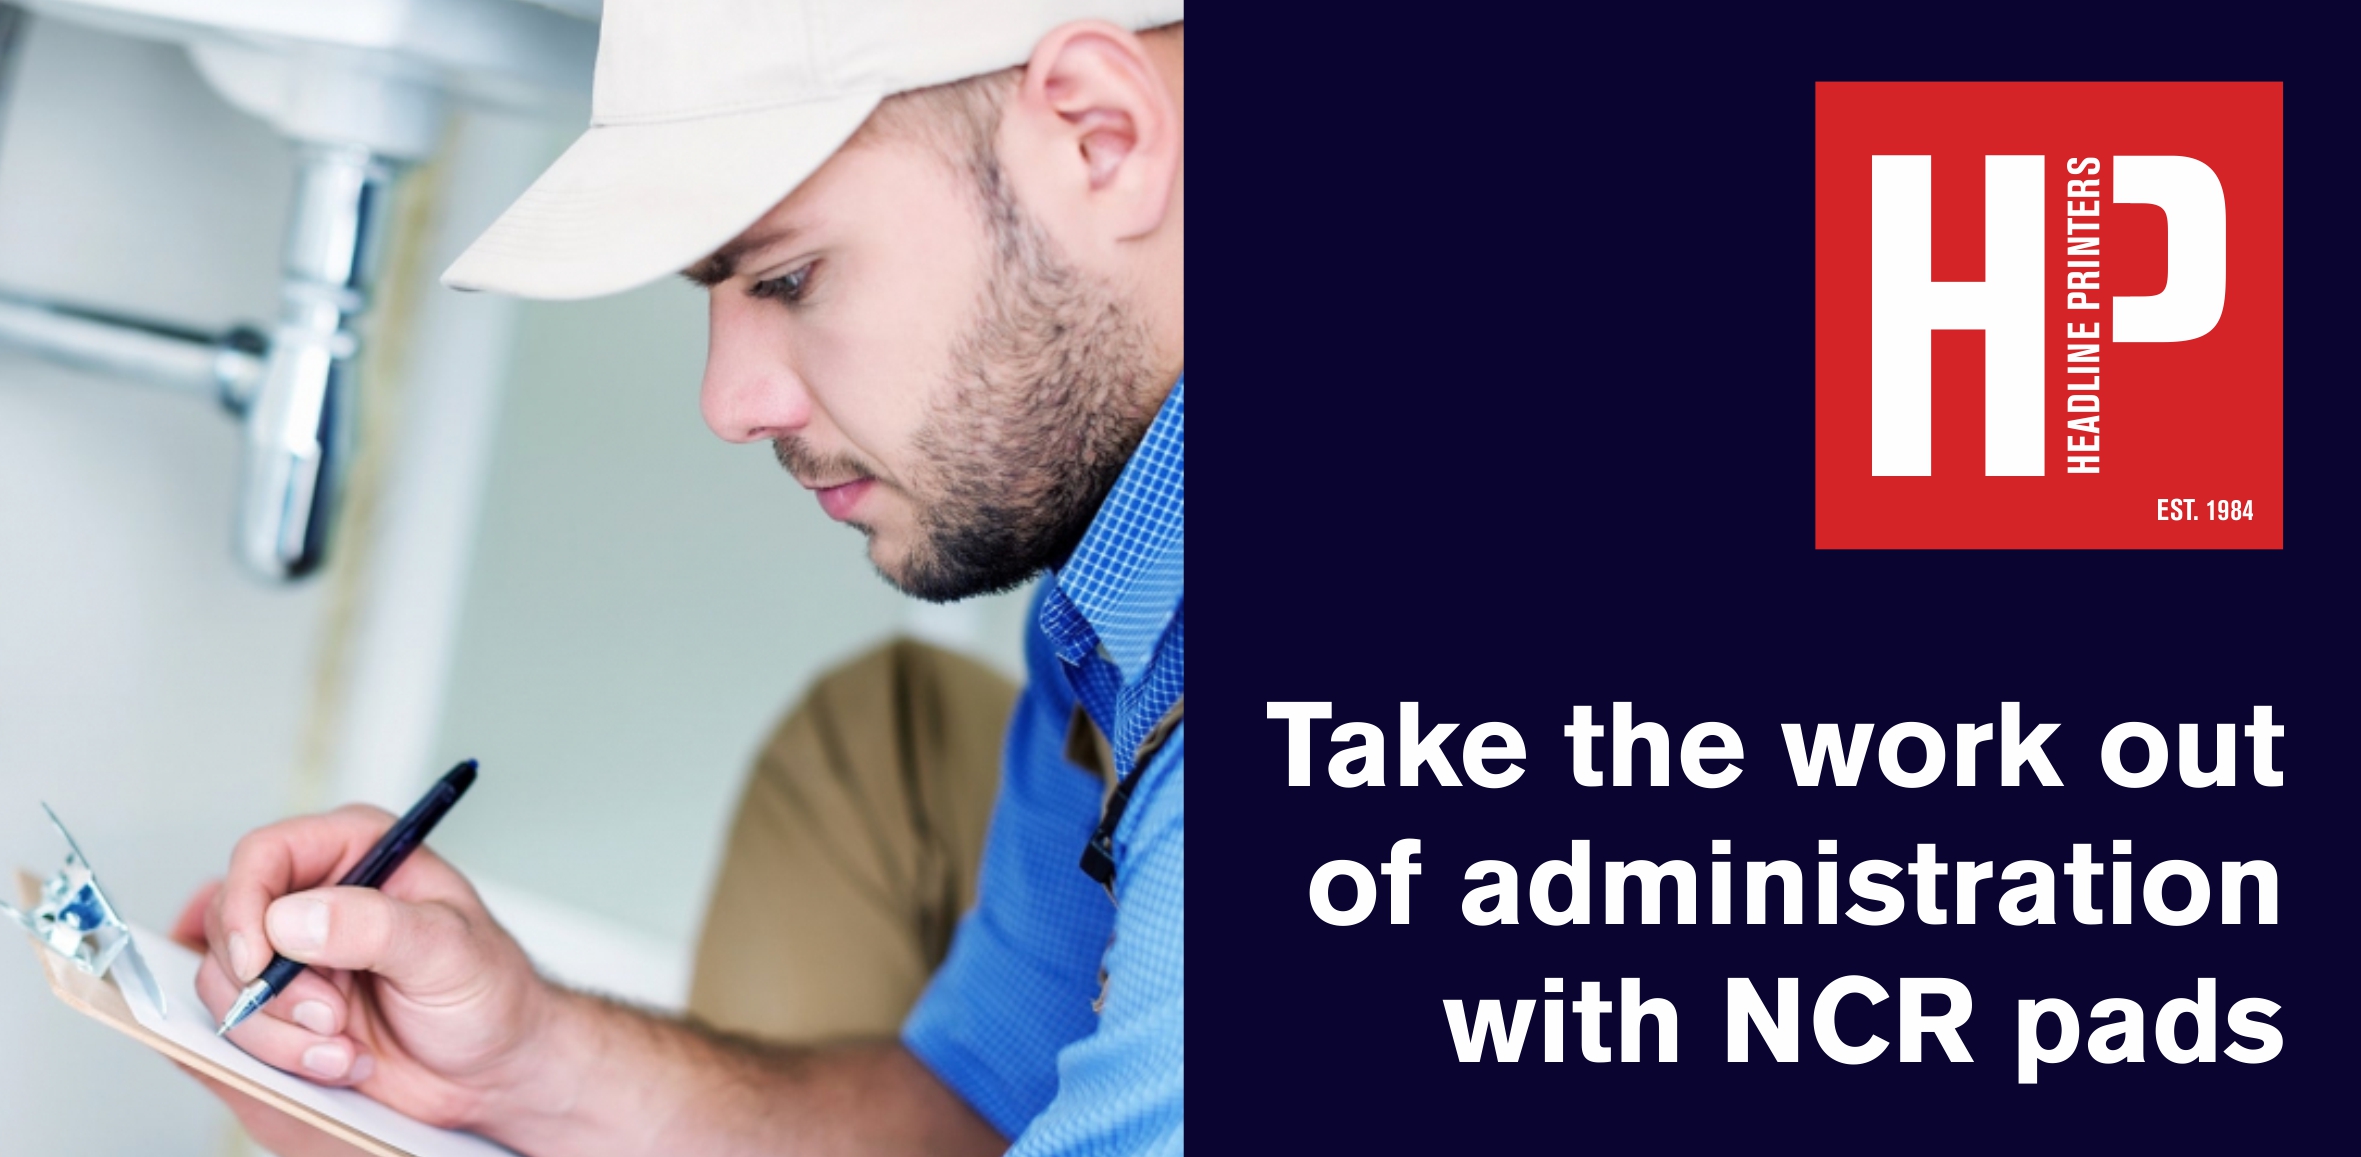 Take the work out of administration with NCR pads